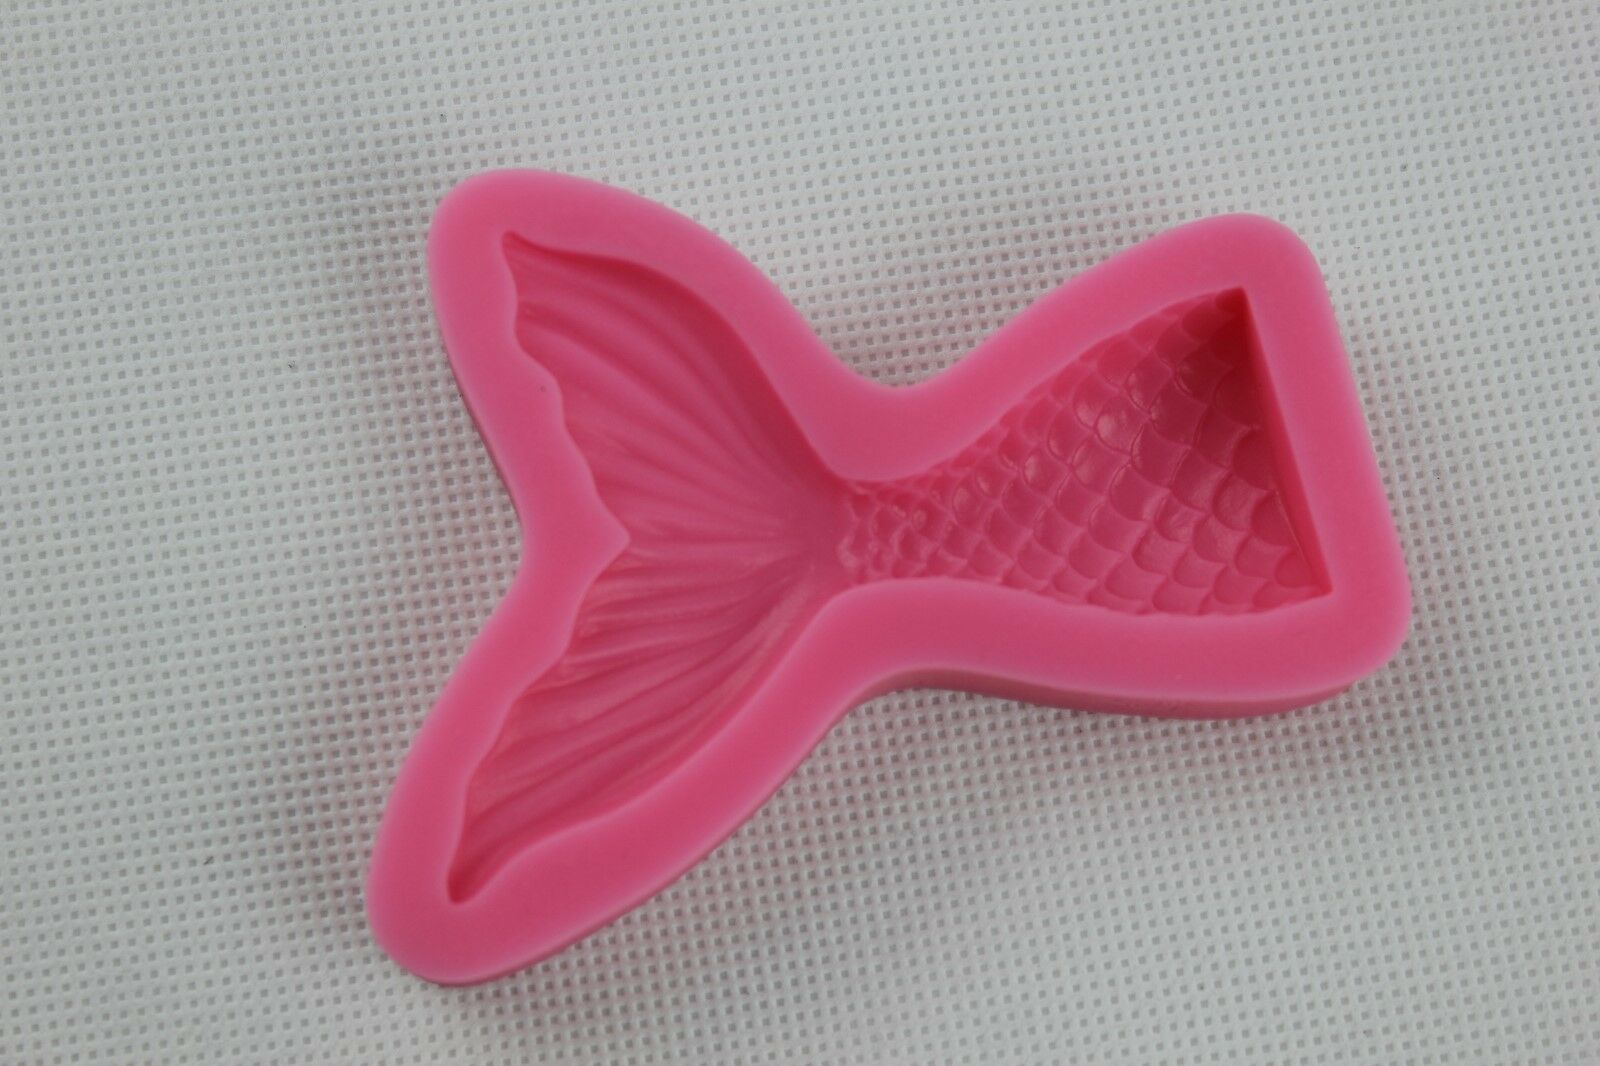 Mermaid FishTail Scales Mould Silicone Cake Fairy Decor Icing Topper Fondant S